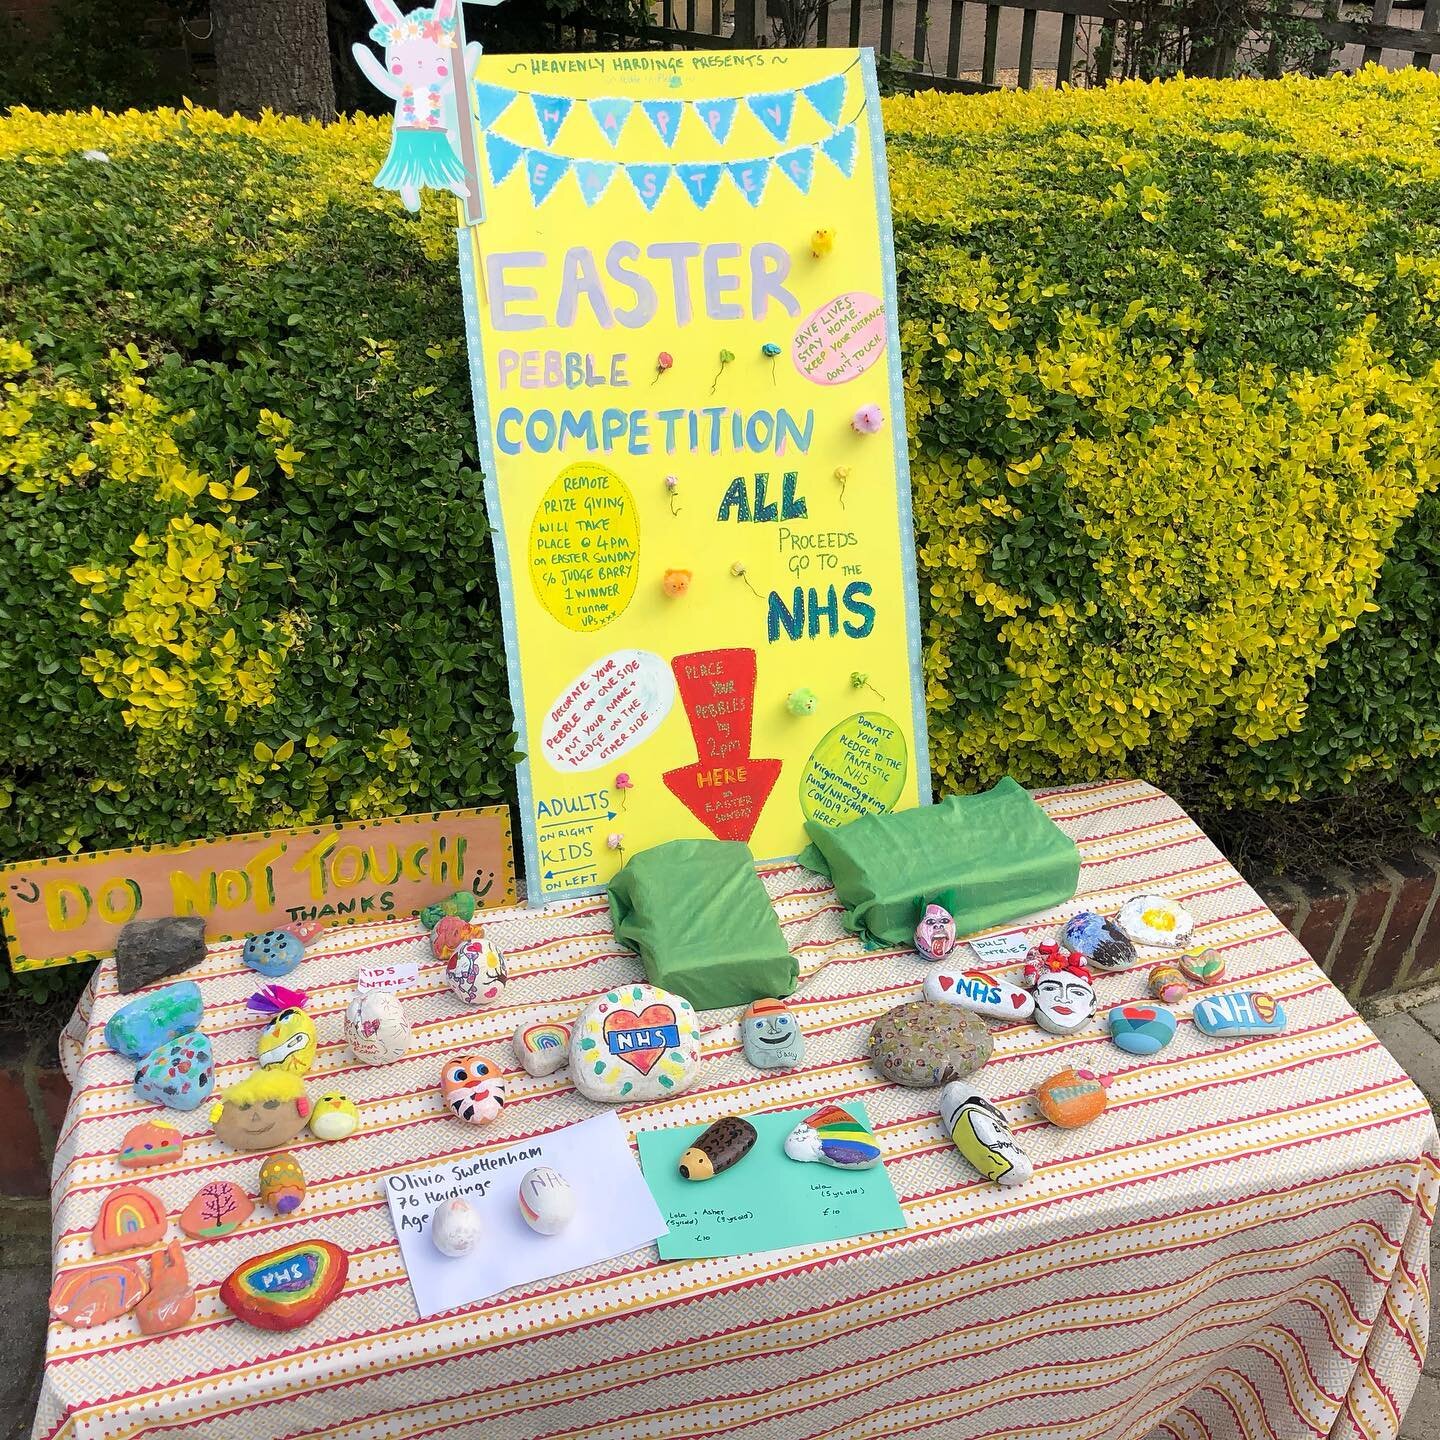 Community goodness in #kensalrise #EasterPebbles competition raising money for @national_health_service